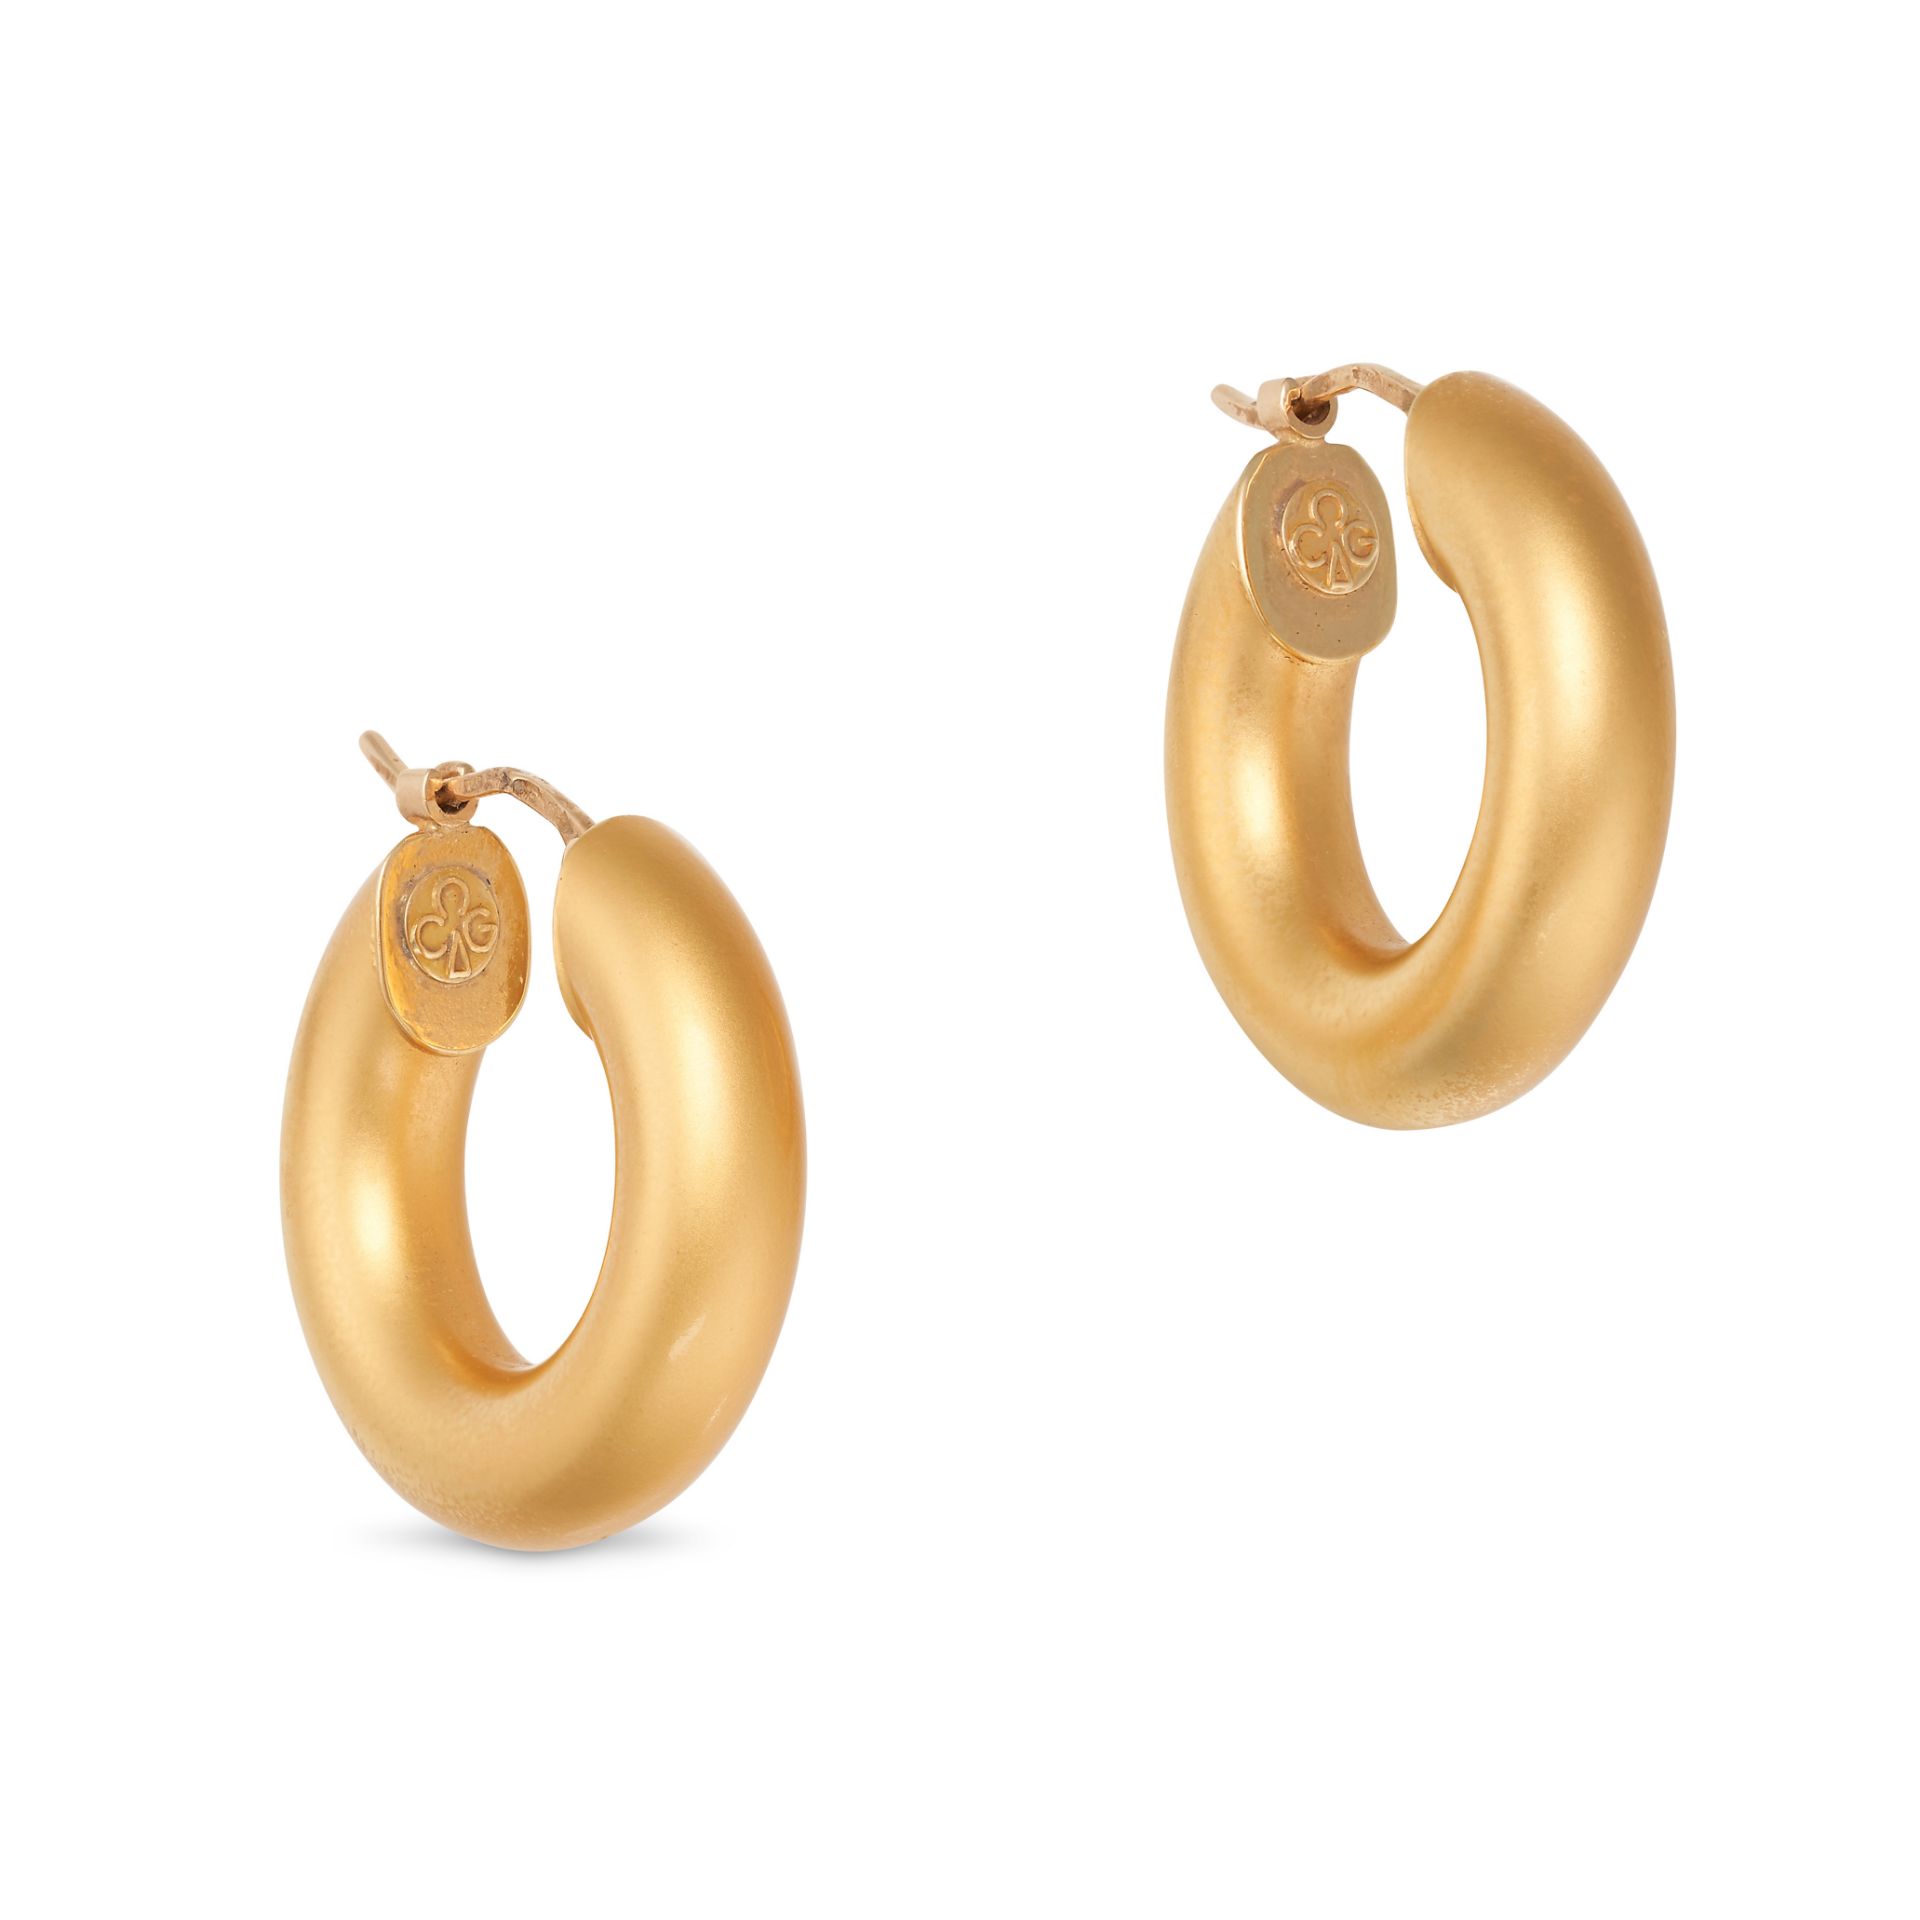 CHARLES GAUET, A PAIR OF GOLD HOOP EARRINGS in 18ct yellow gold, designed as a polished gold hoop... - Image 2 of 2